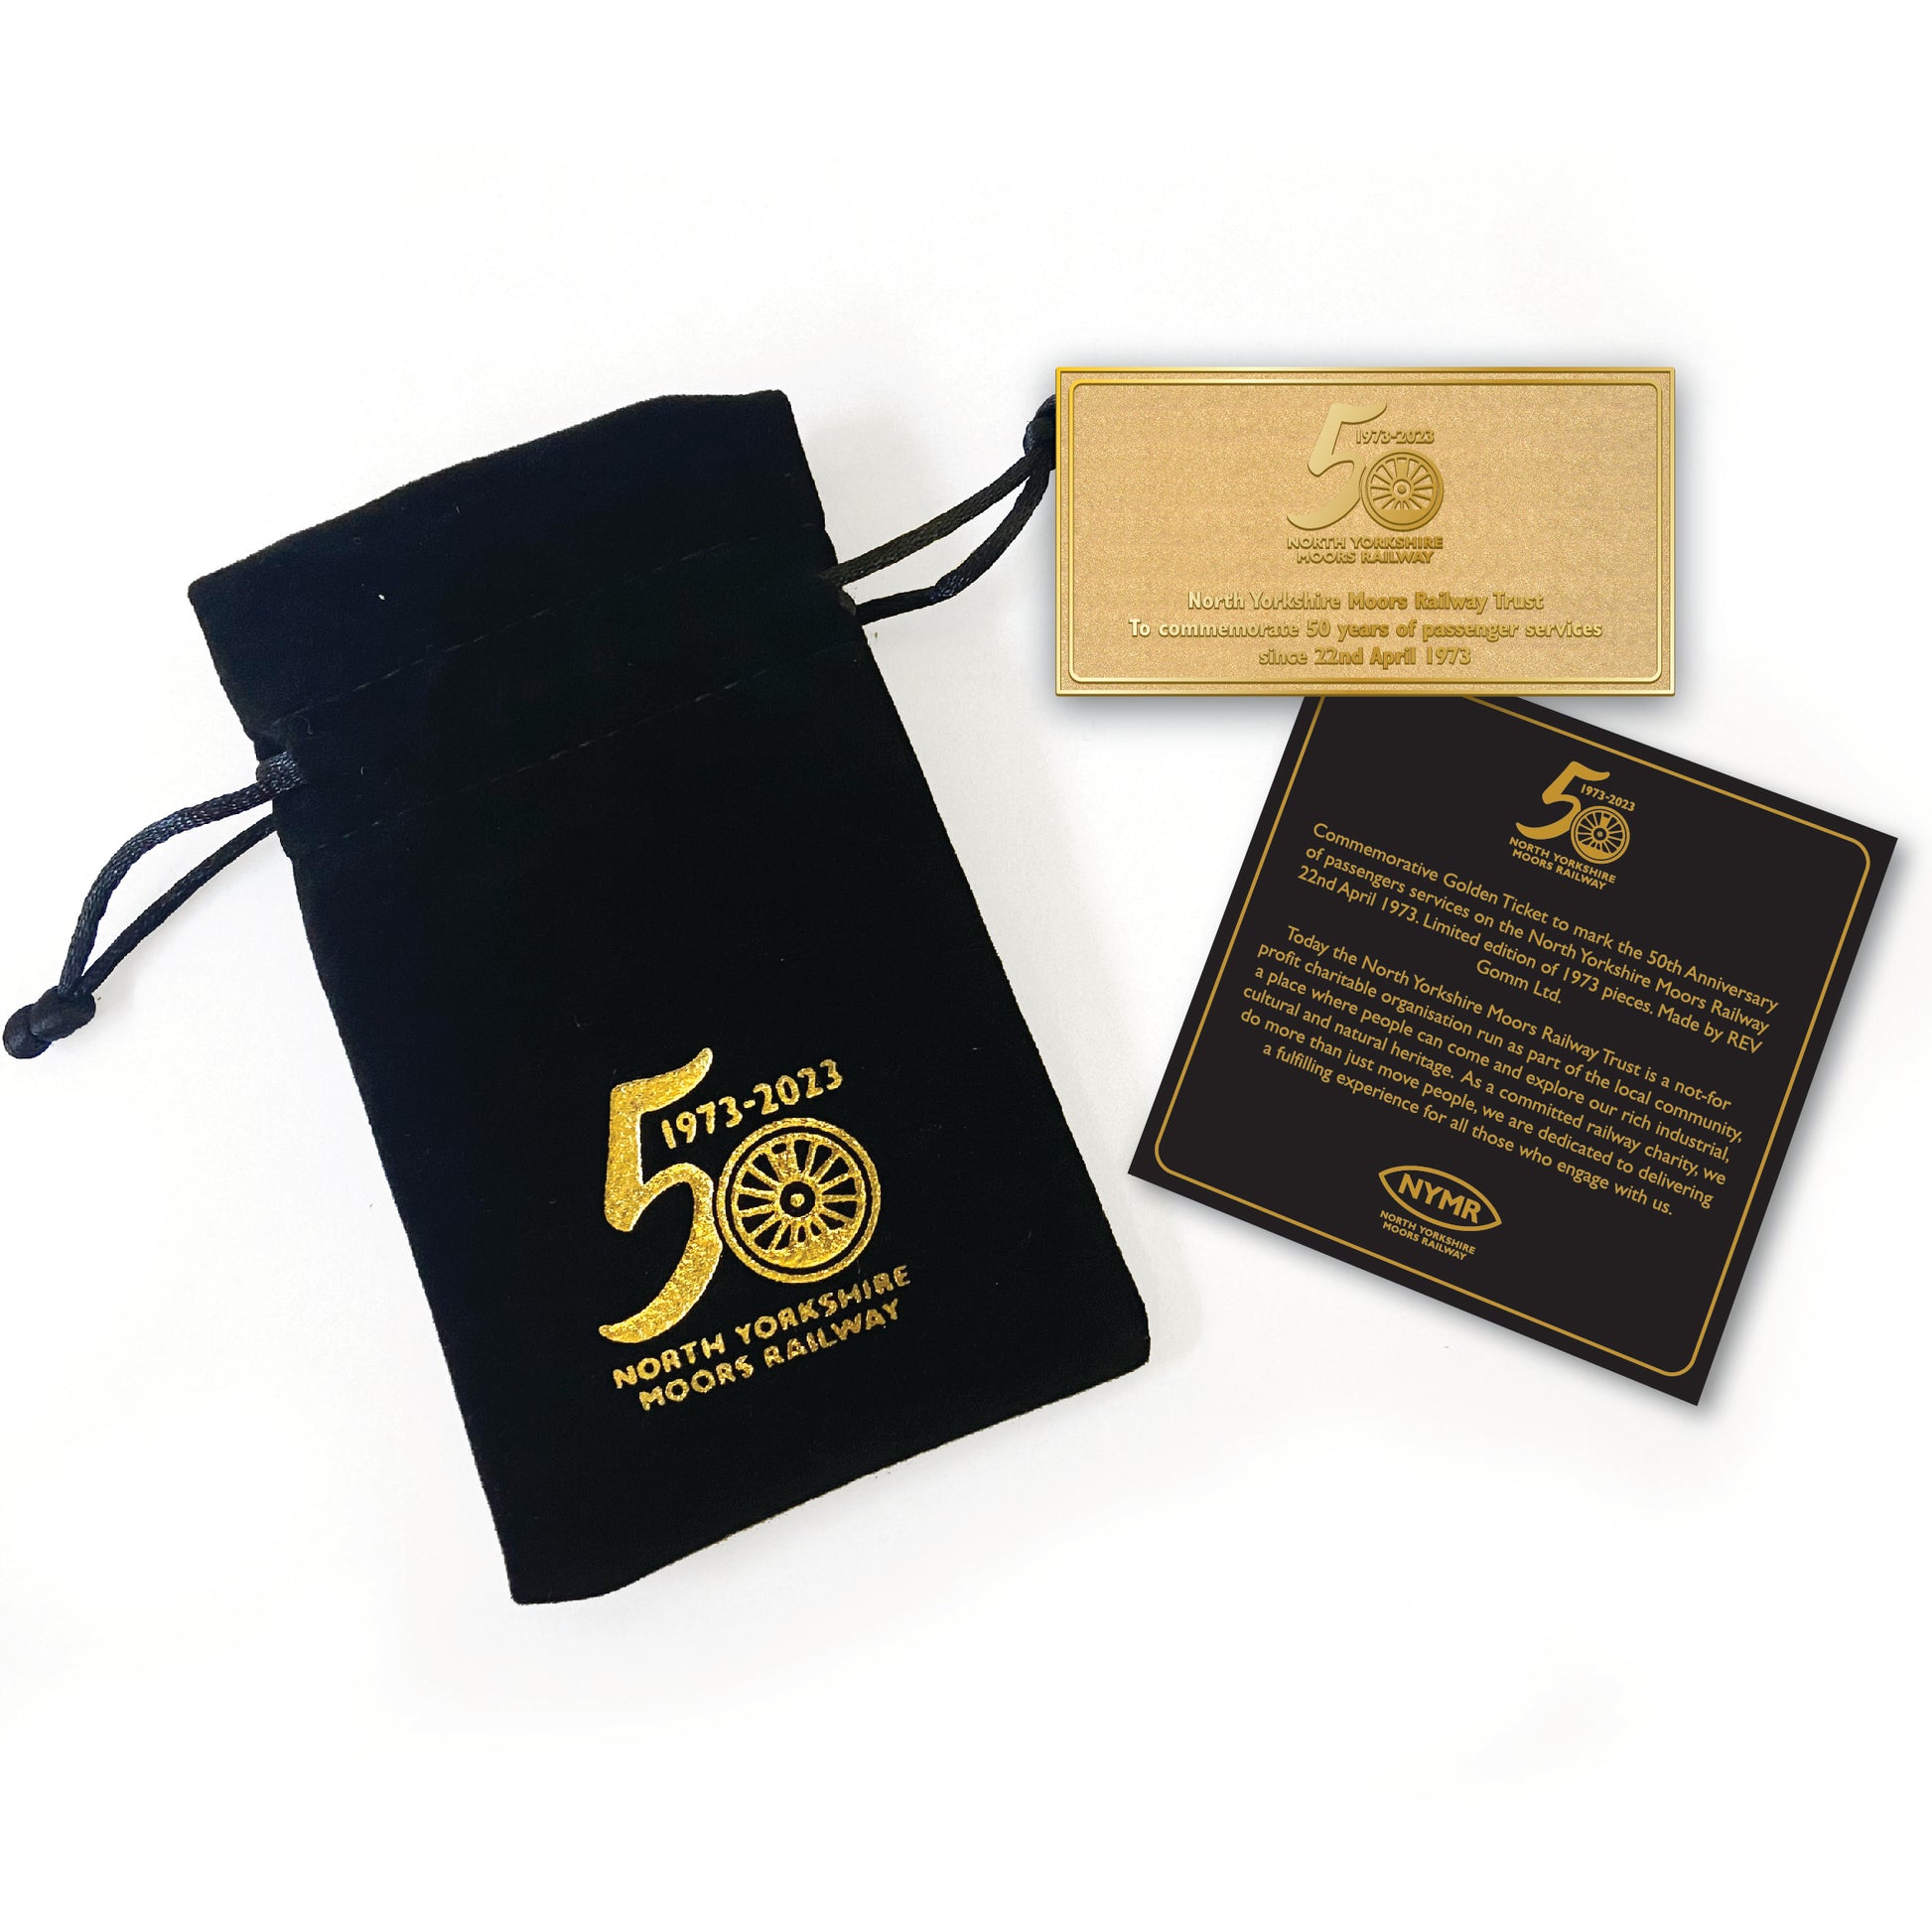 A golden metal ticket with black velvet pull string pouch and information card in matching colours